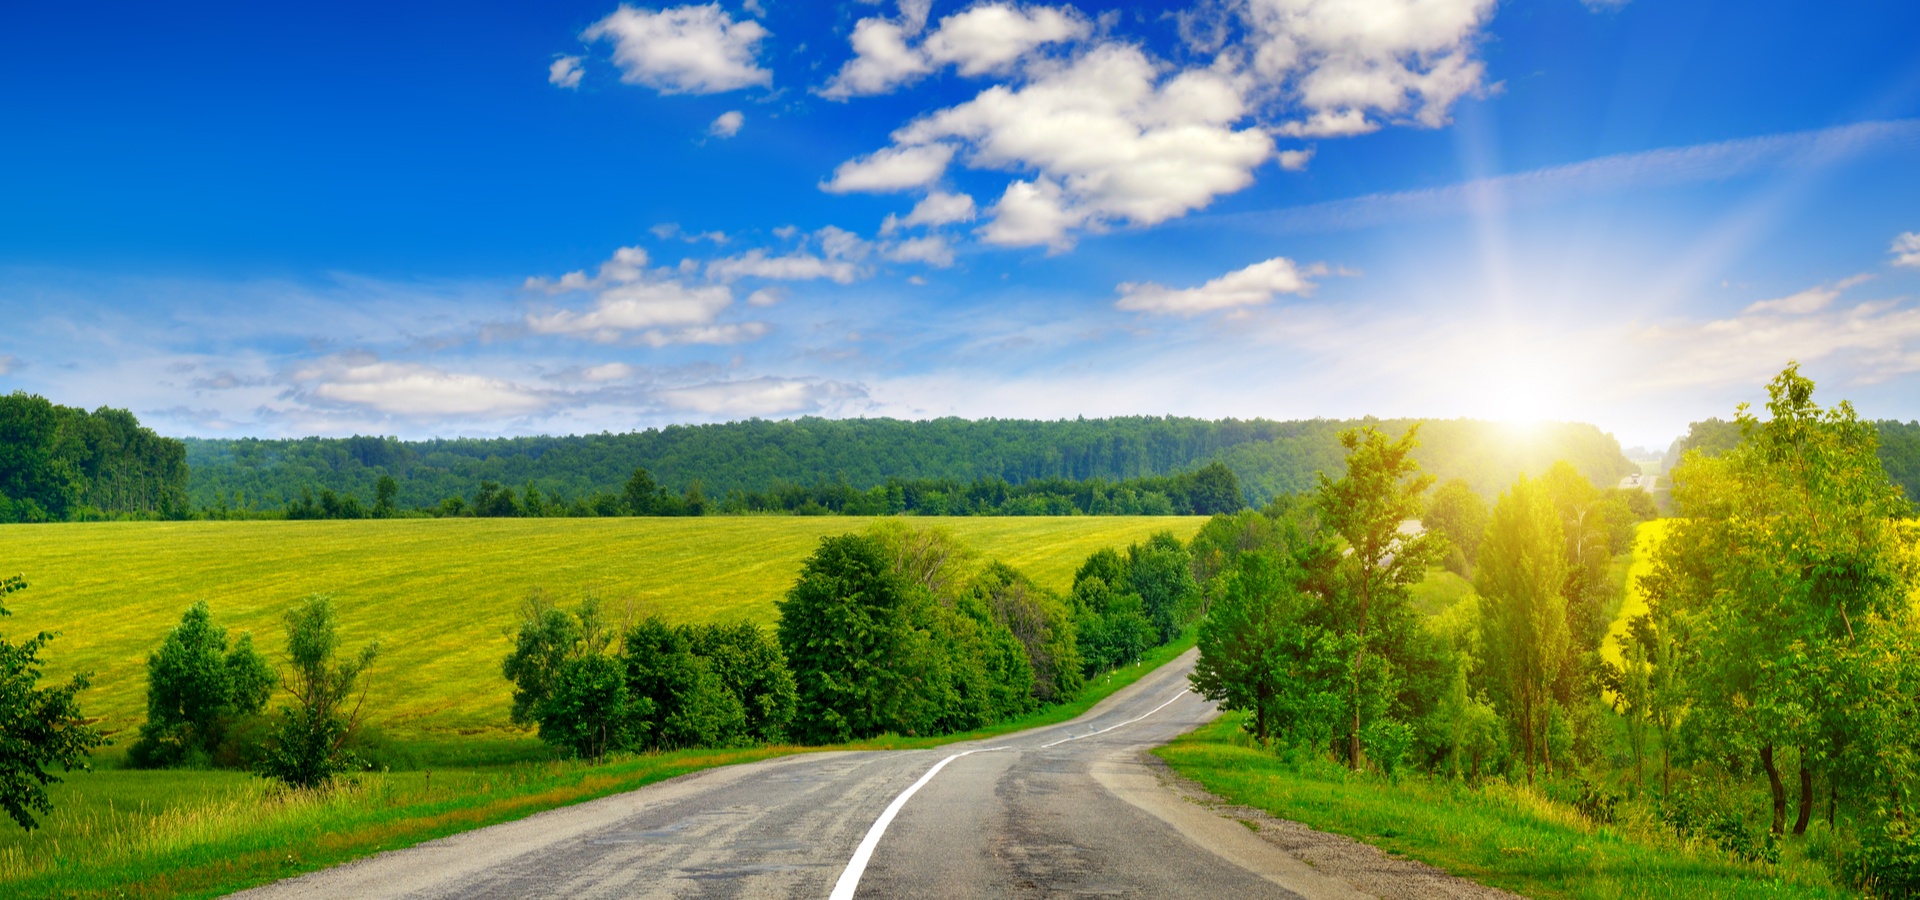 Road with trees, grass and sky